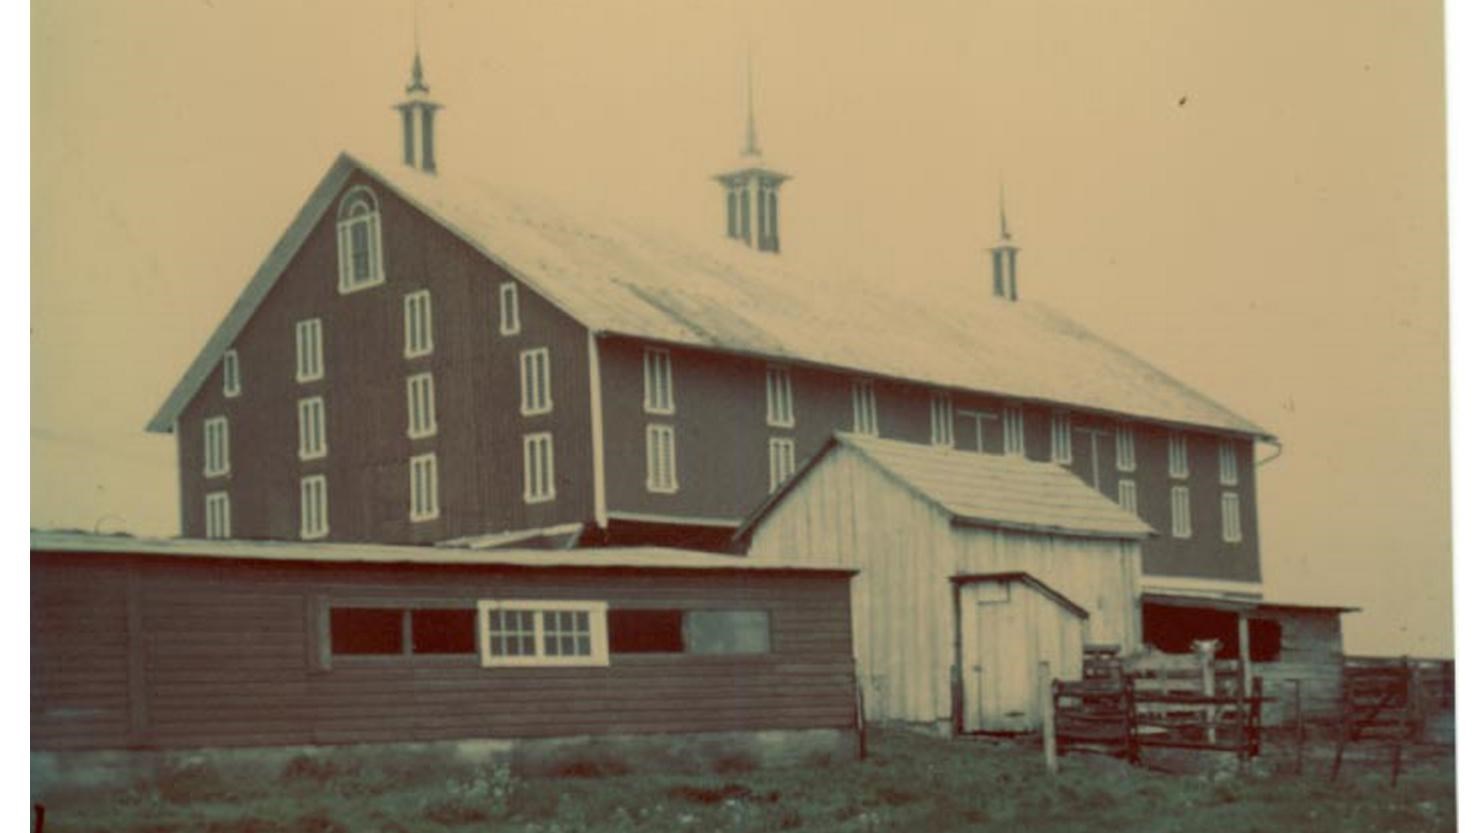 A color image of a tall red barn with a small white building in front, and a red chicken coop